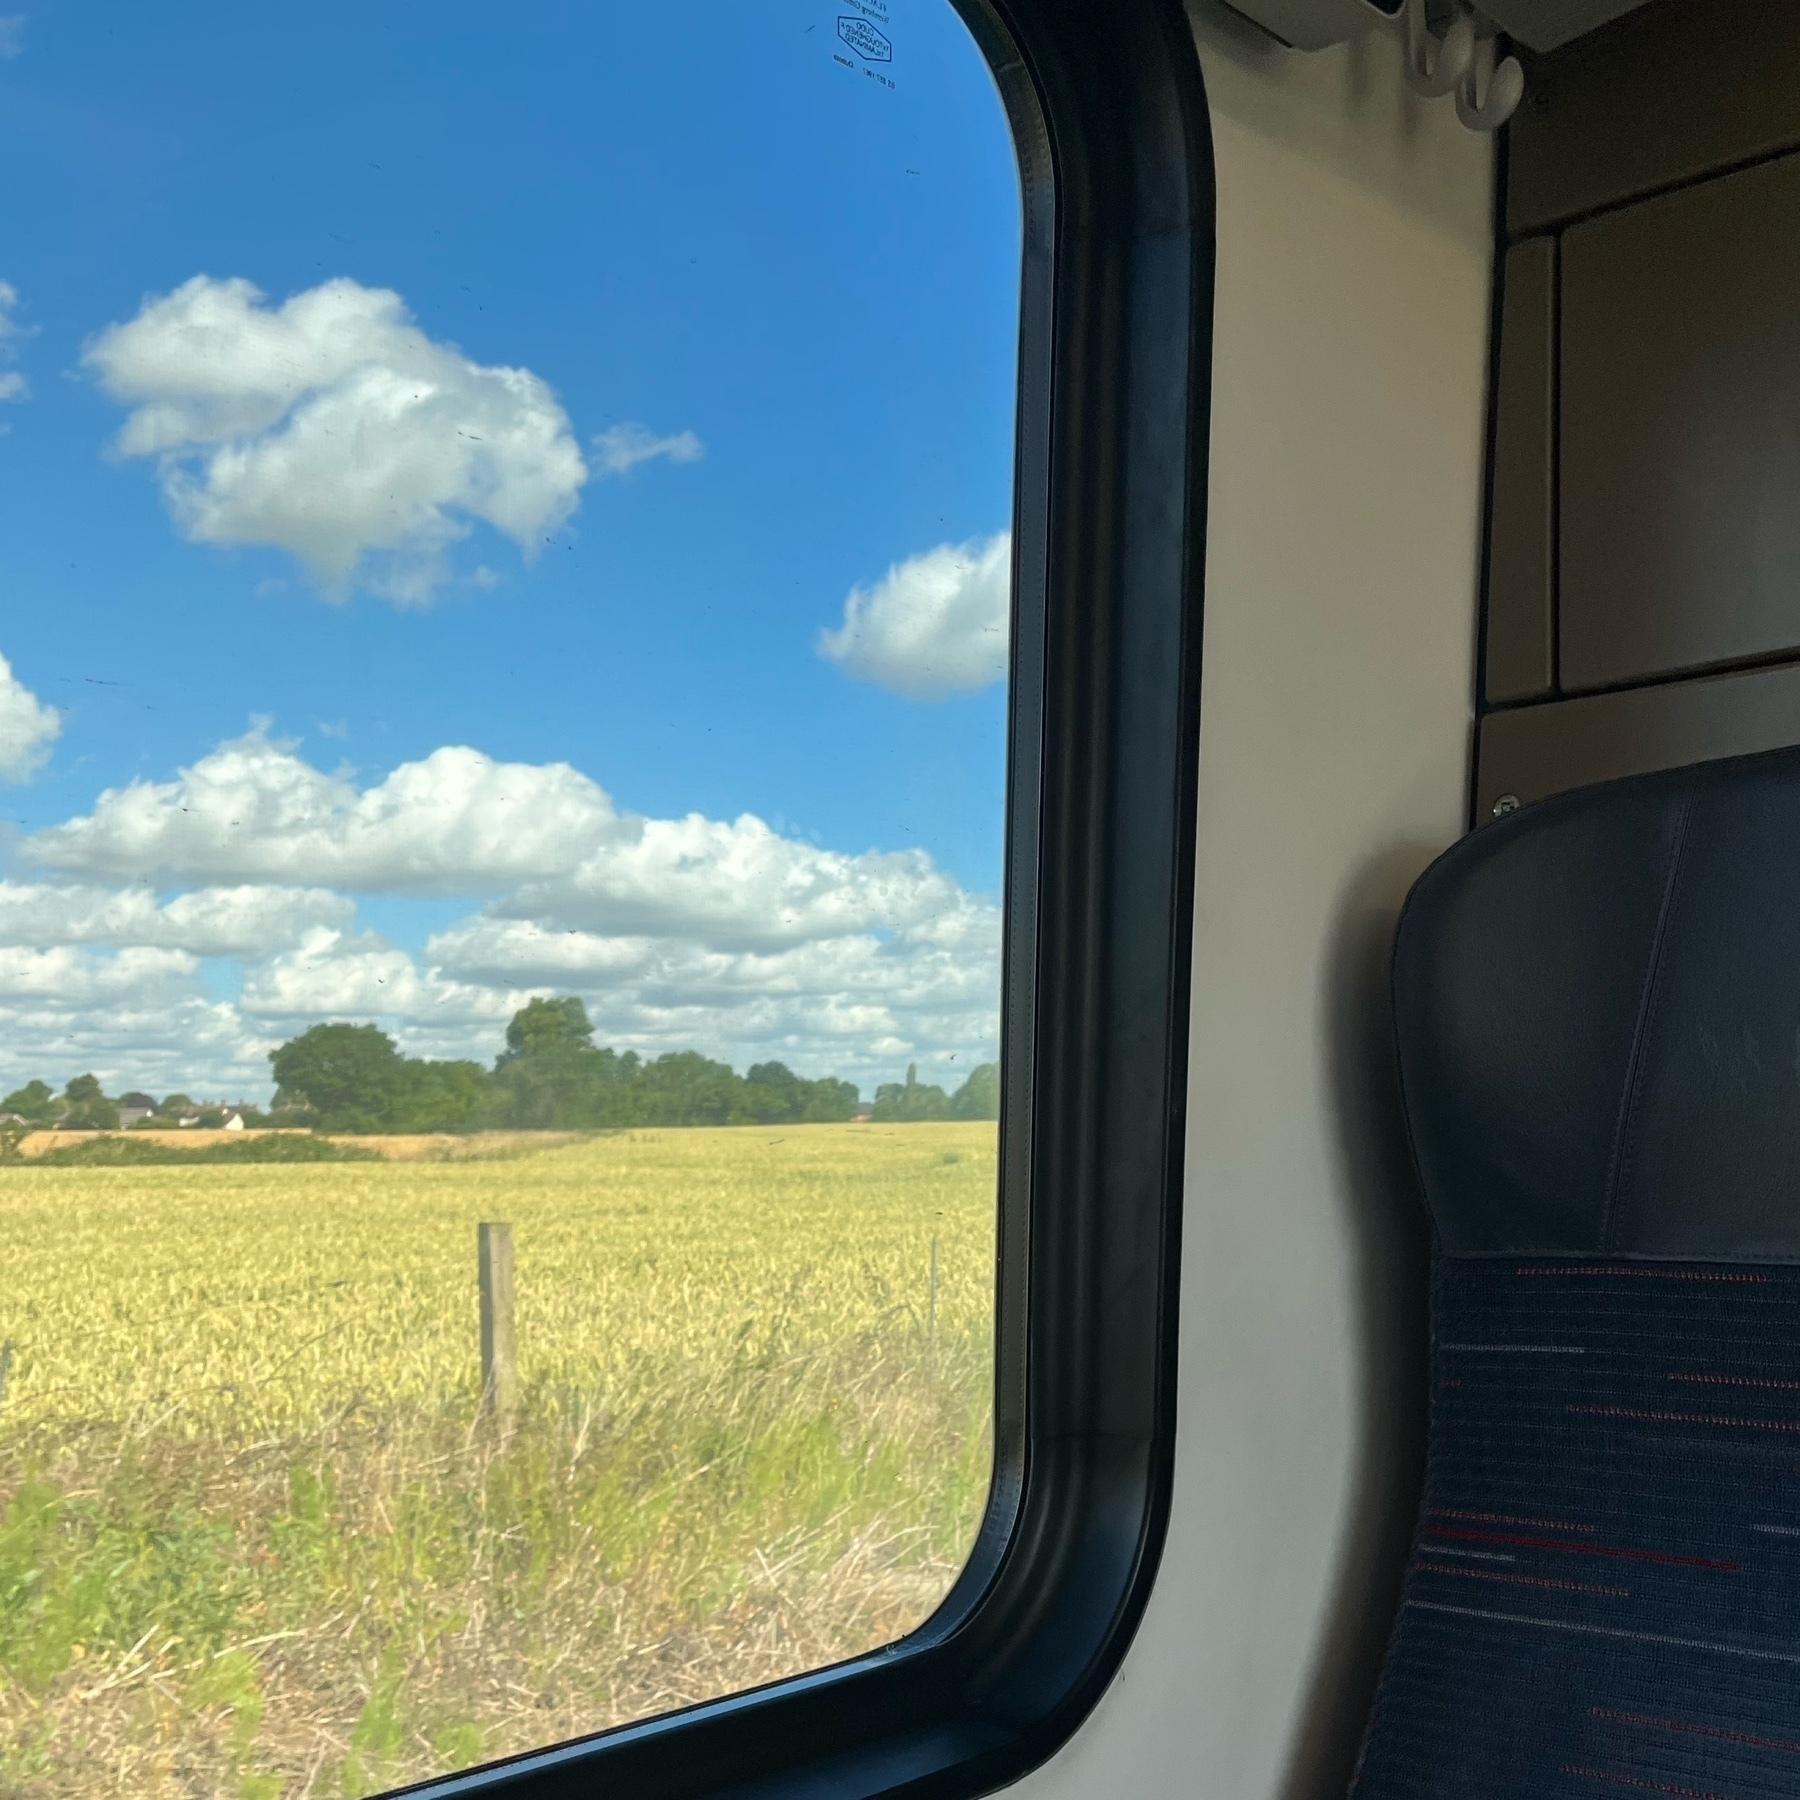 Train window with background of a green field with the seat next to the window